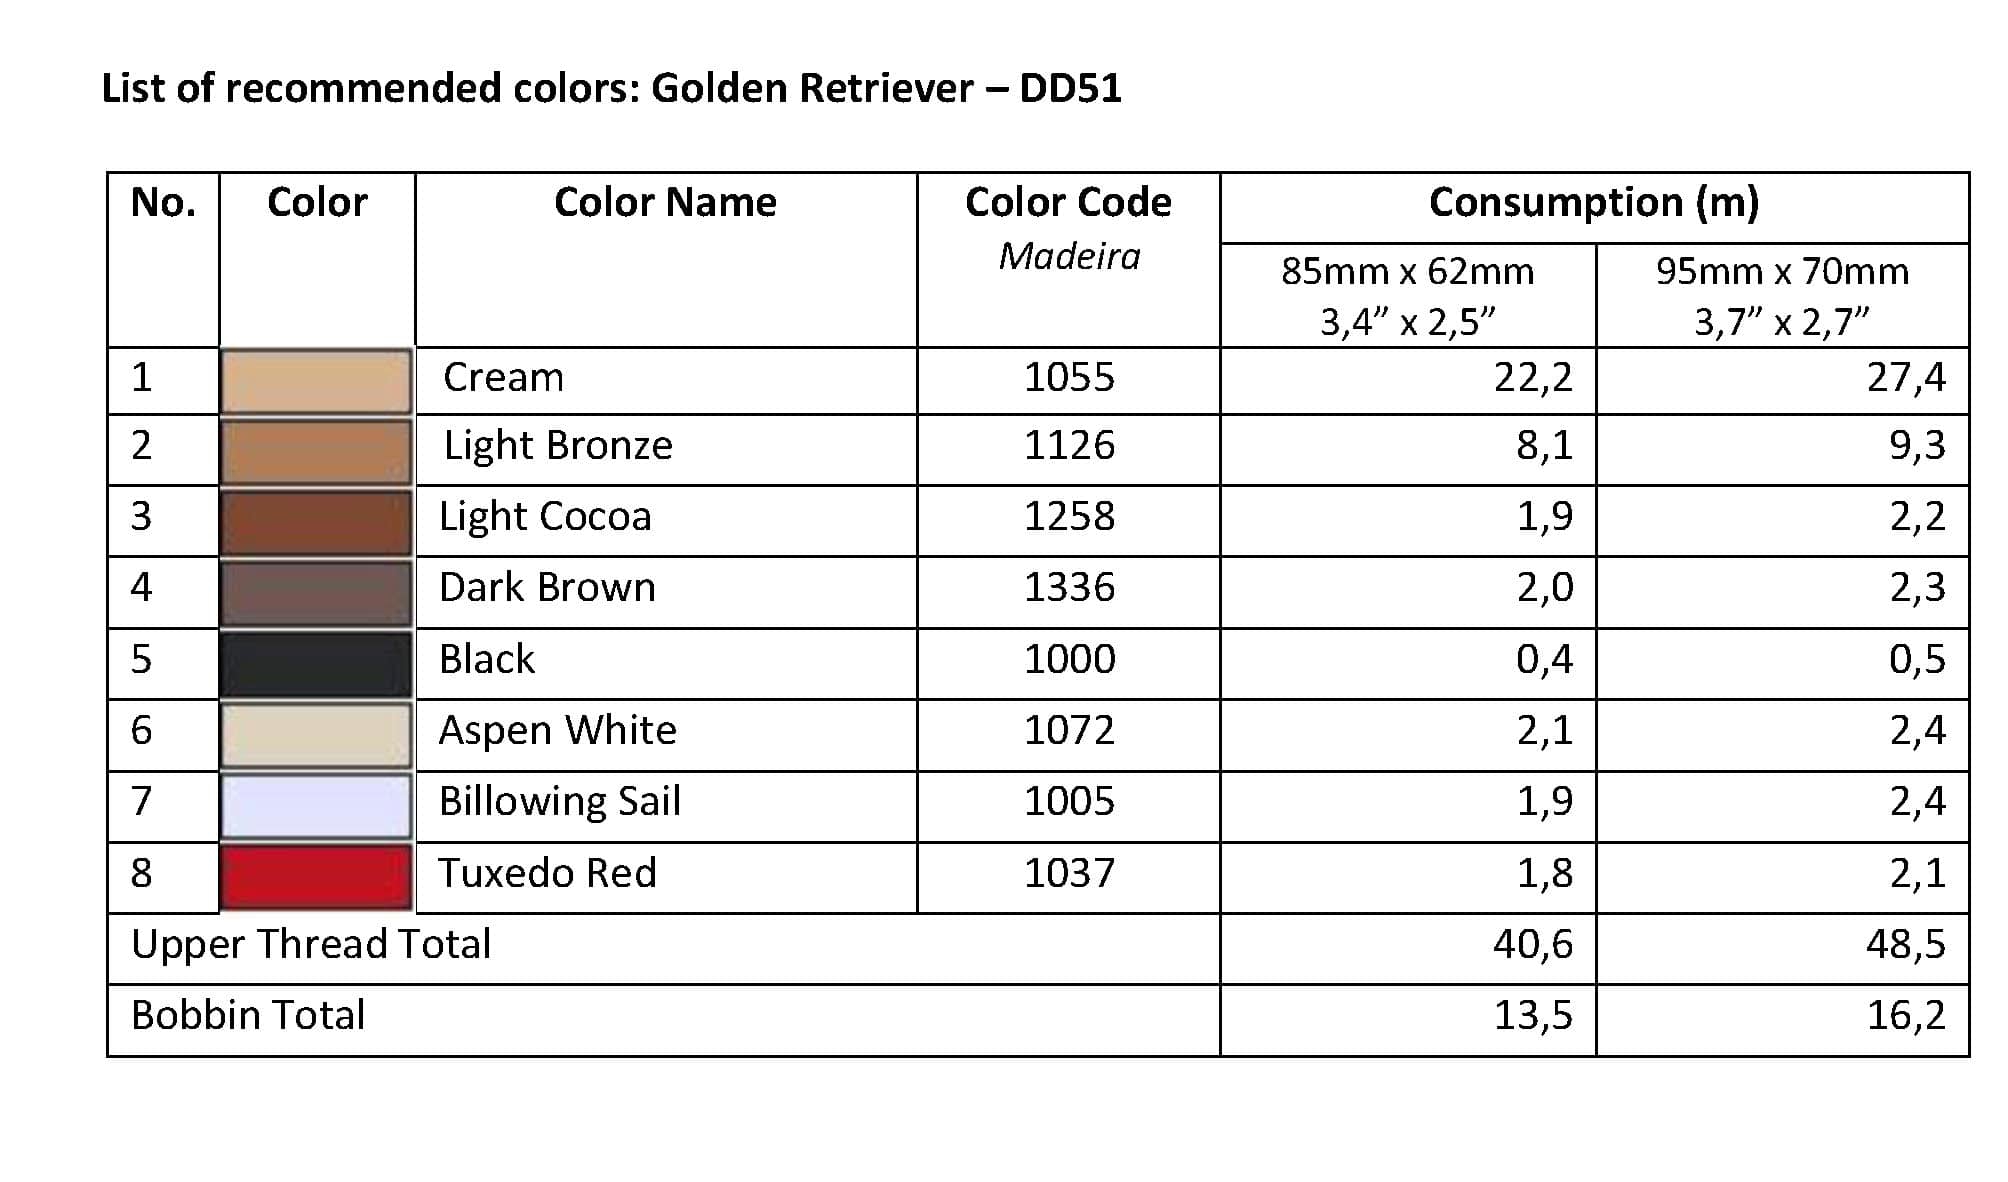 List of Recommended Colors - Golden Retriever DD51